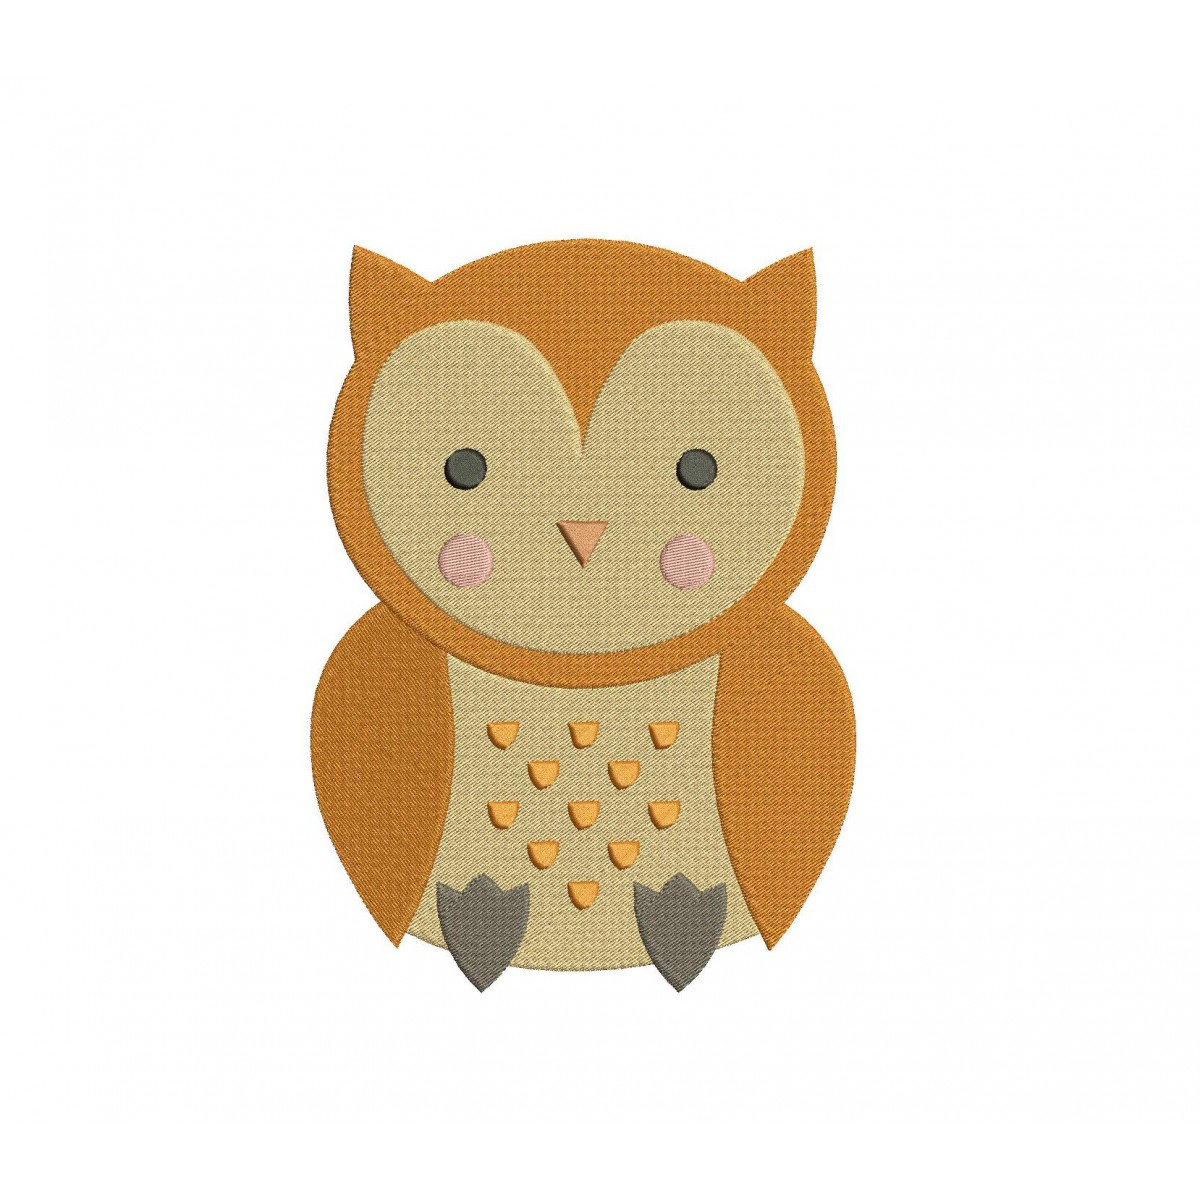 Owl Embroidery Pattern Owl Embroidery Design